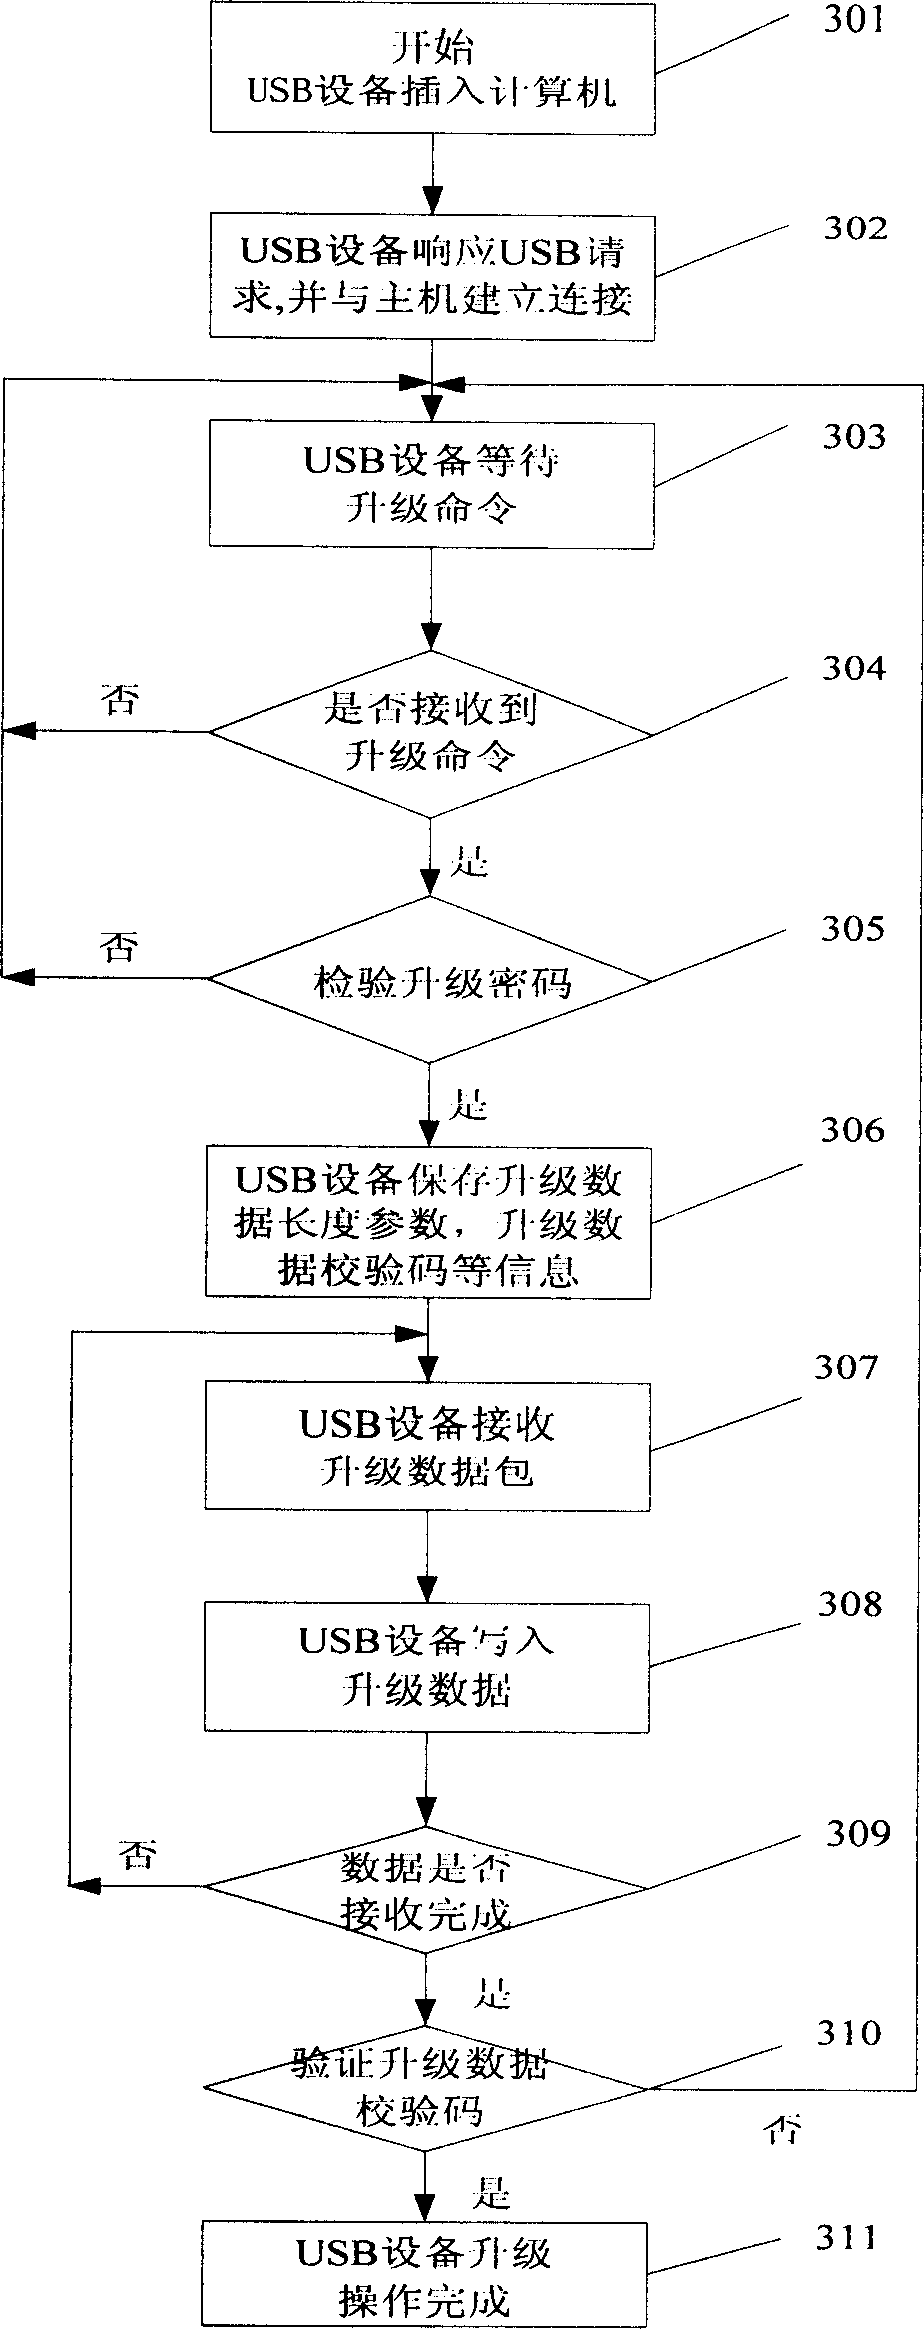 Online updating method for USB device when communication protocol constrained